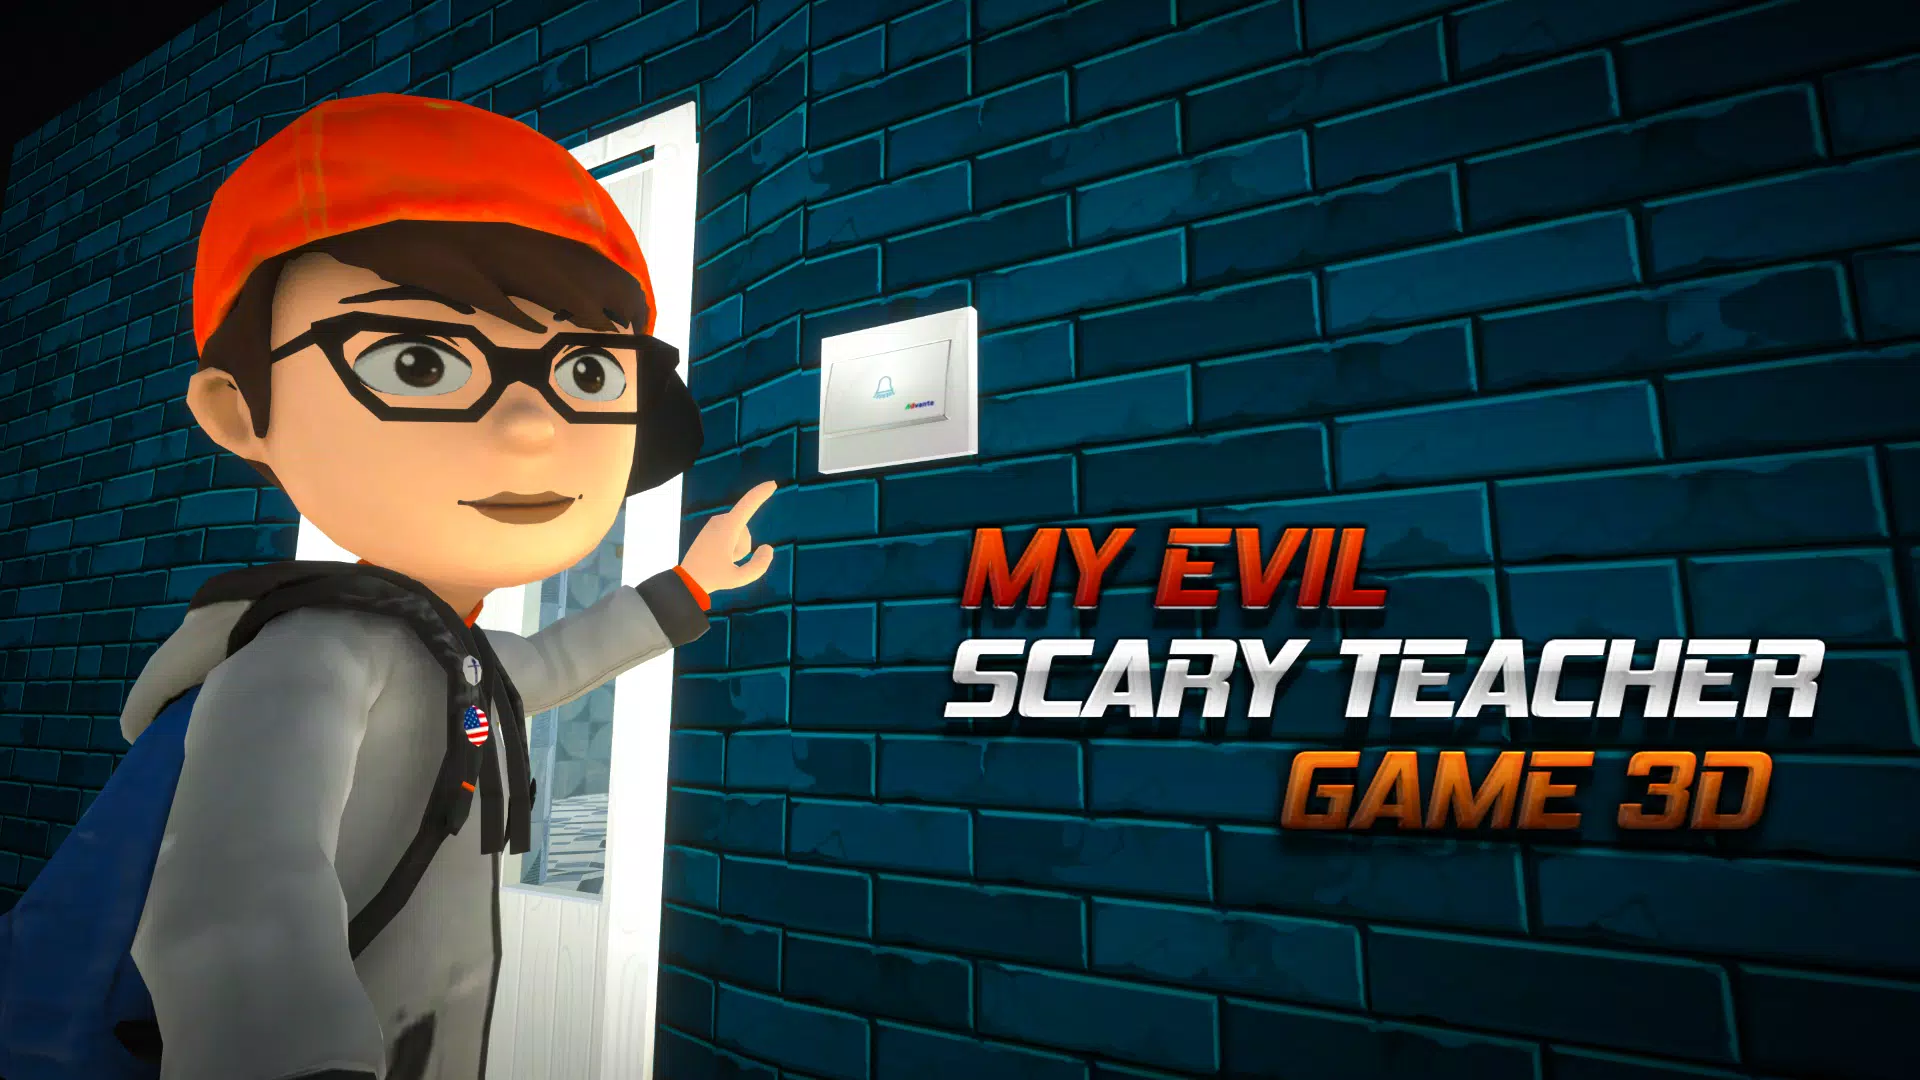 Scary Teacher 3D 6.6 Free Download